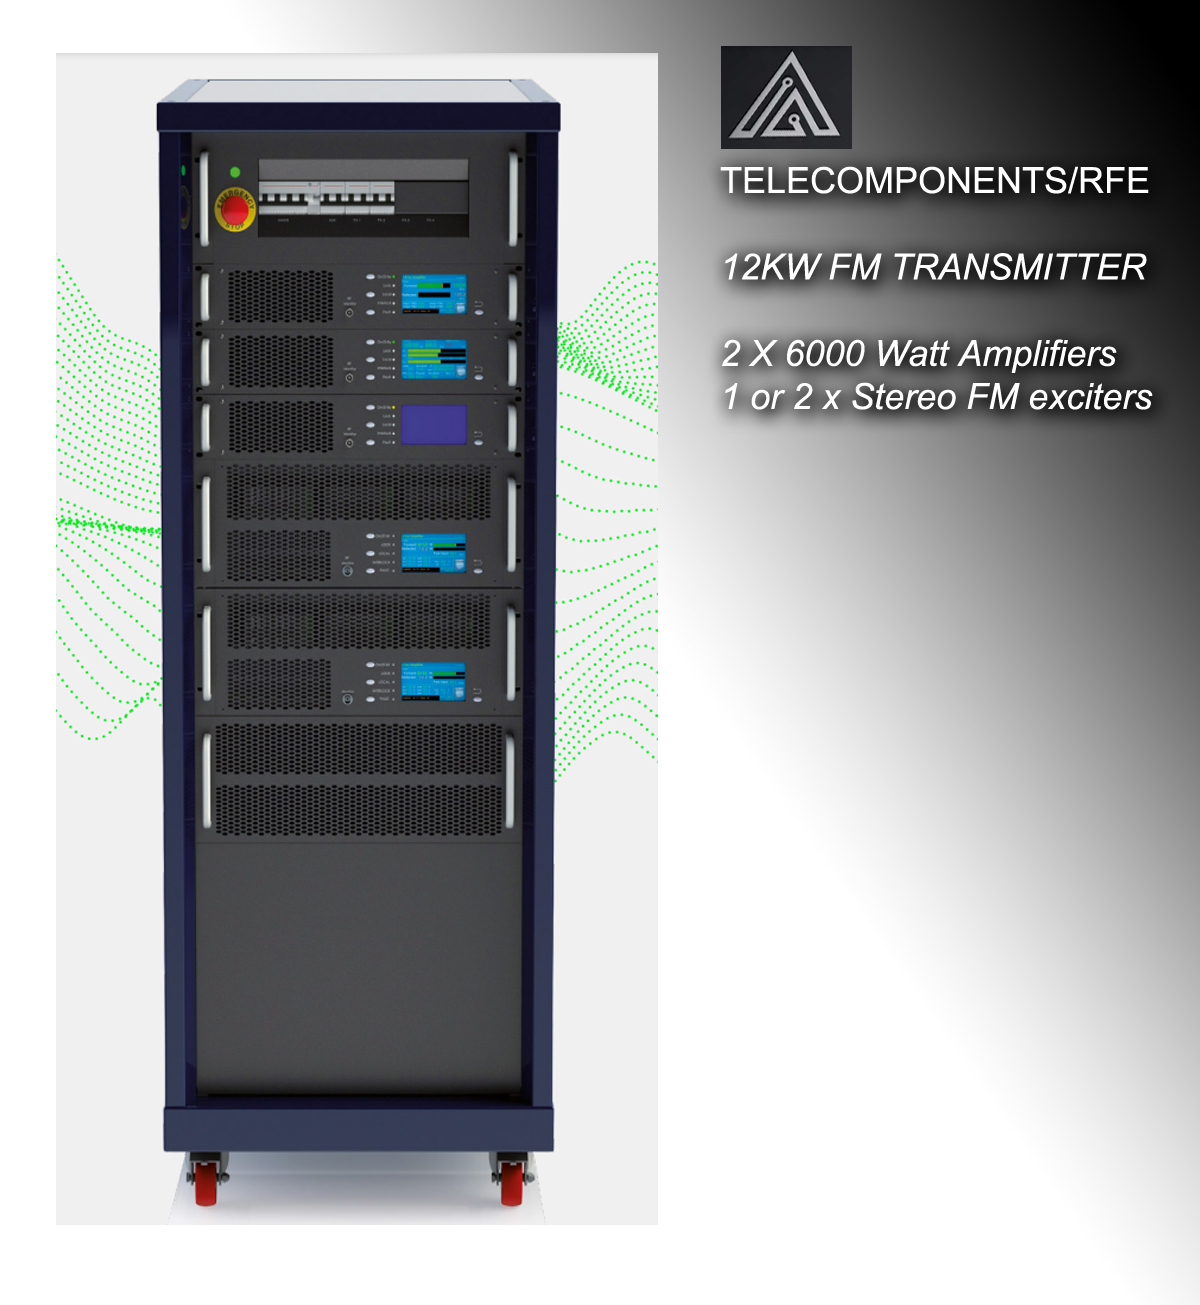 12 Kw TLDS/12000 FM Telecomponents transmitter